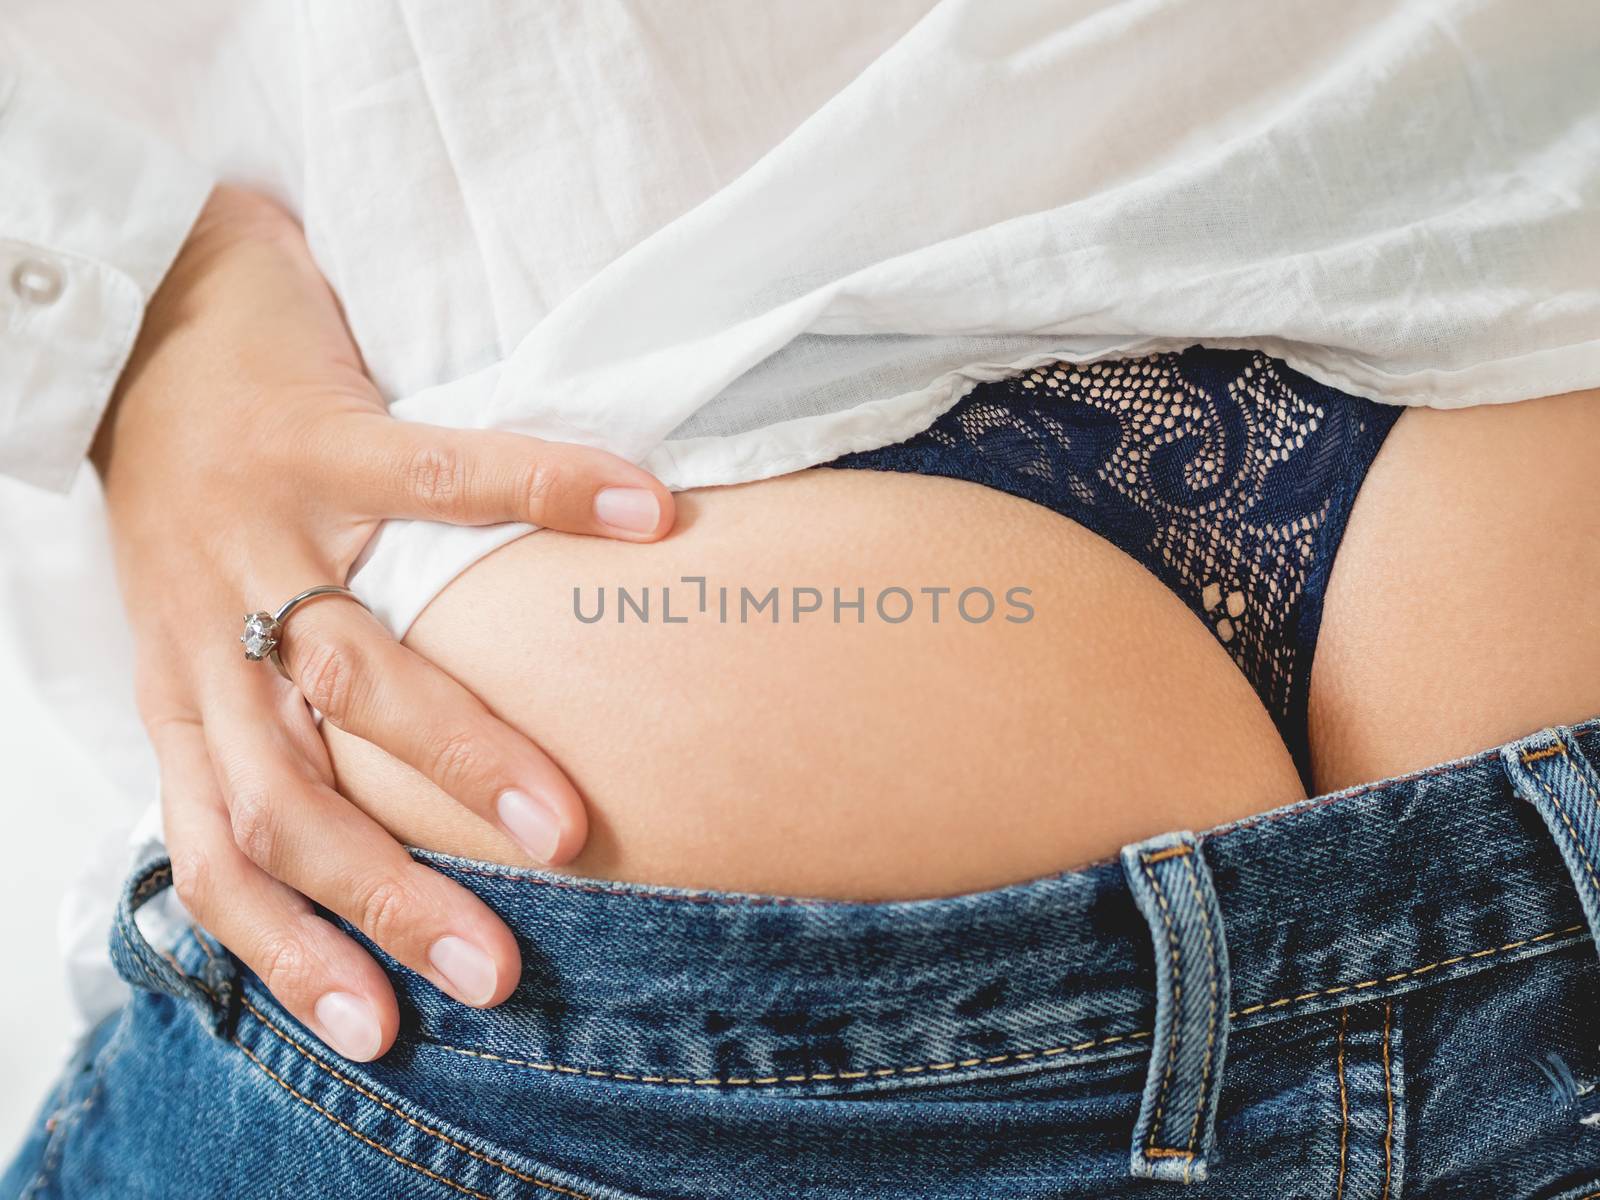 Close up photo of woman buttocks with laced thong and engagement ring on her finger. Woman in white shirt, classic blue jeans and underwear.